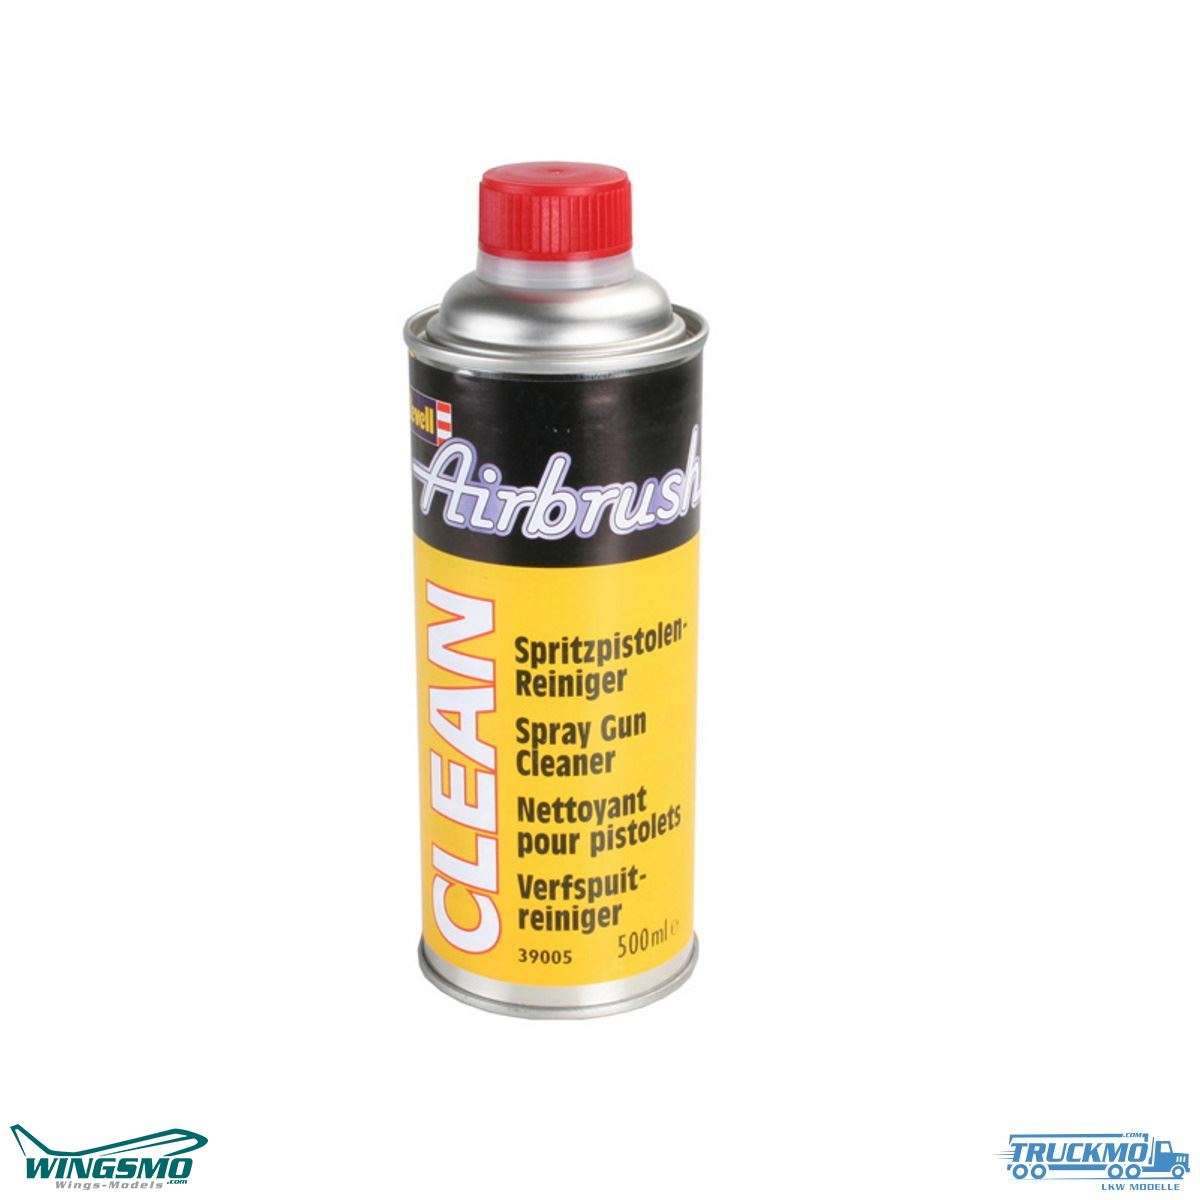 Revell Airbrush Email Clean 500ml 39005